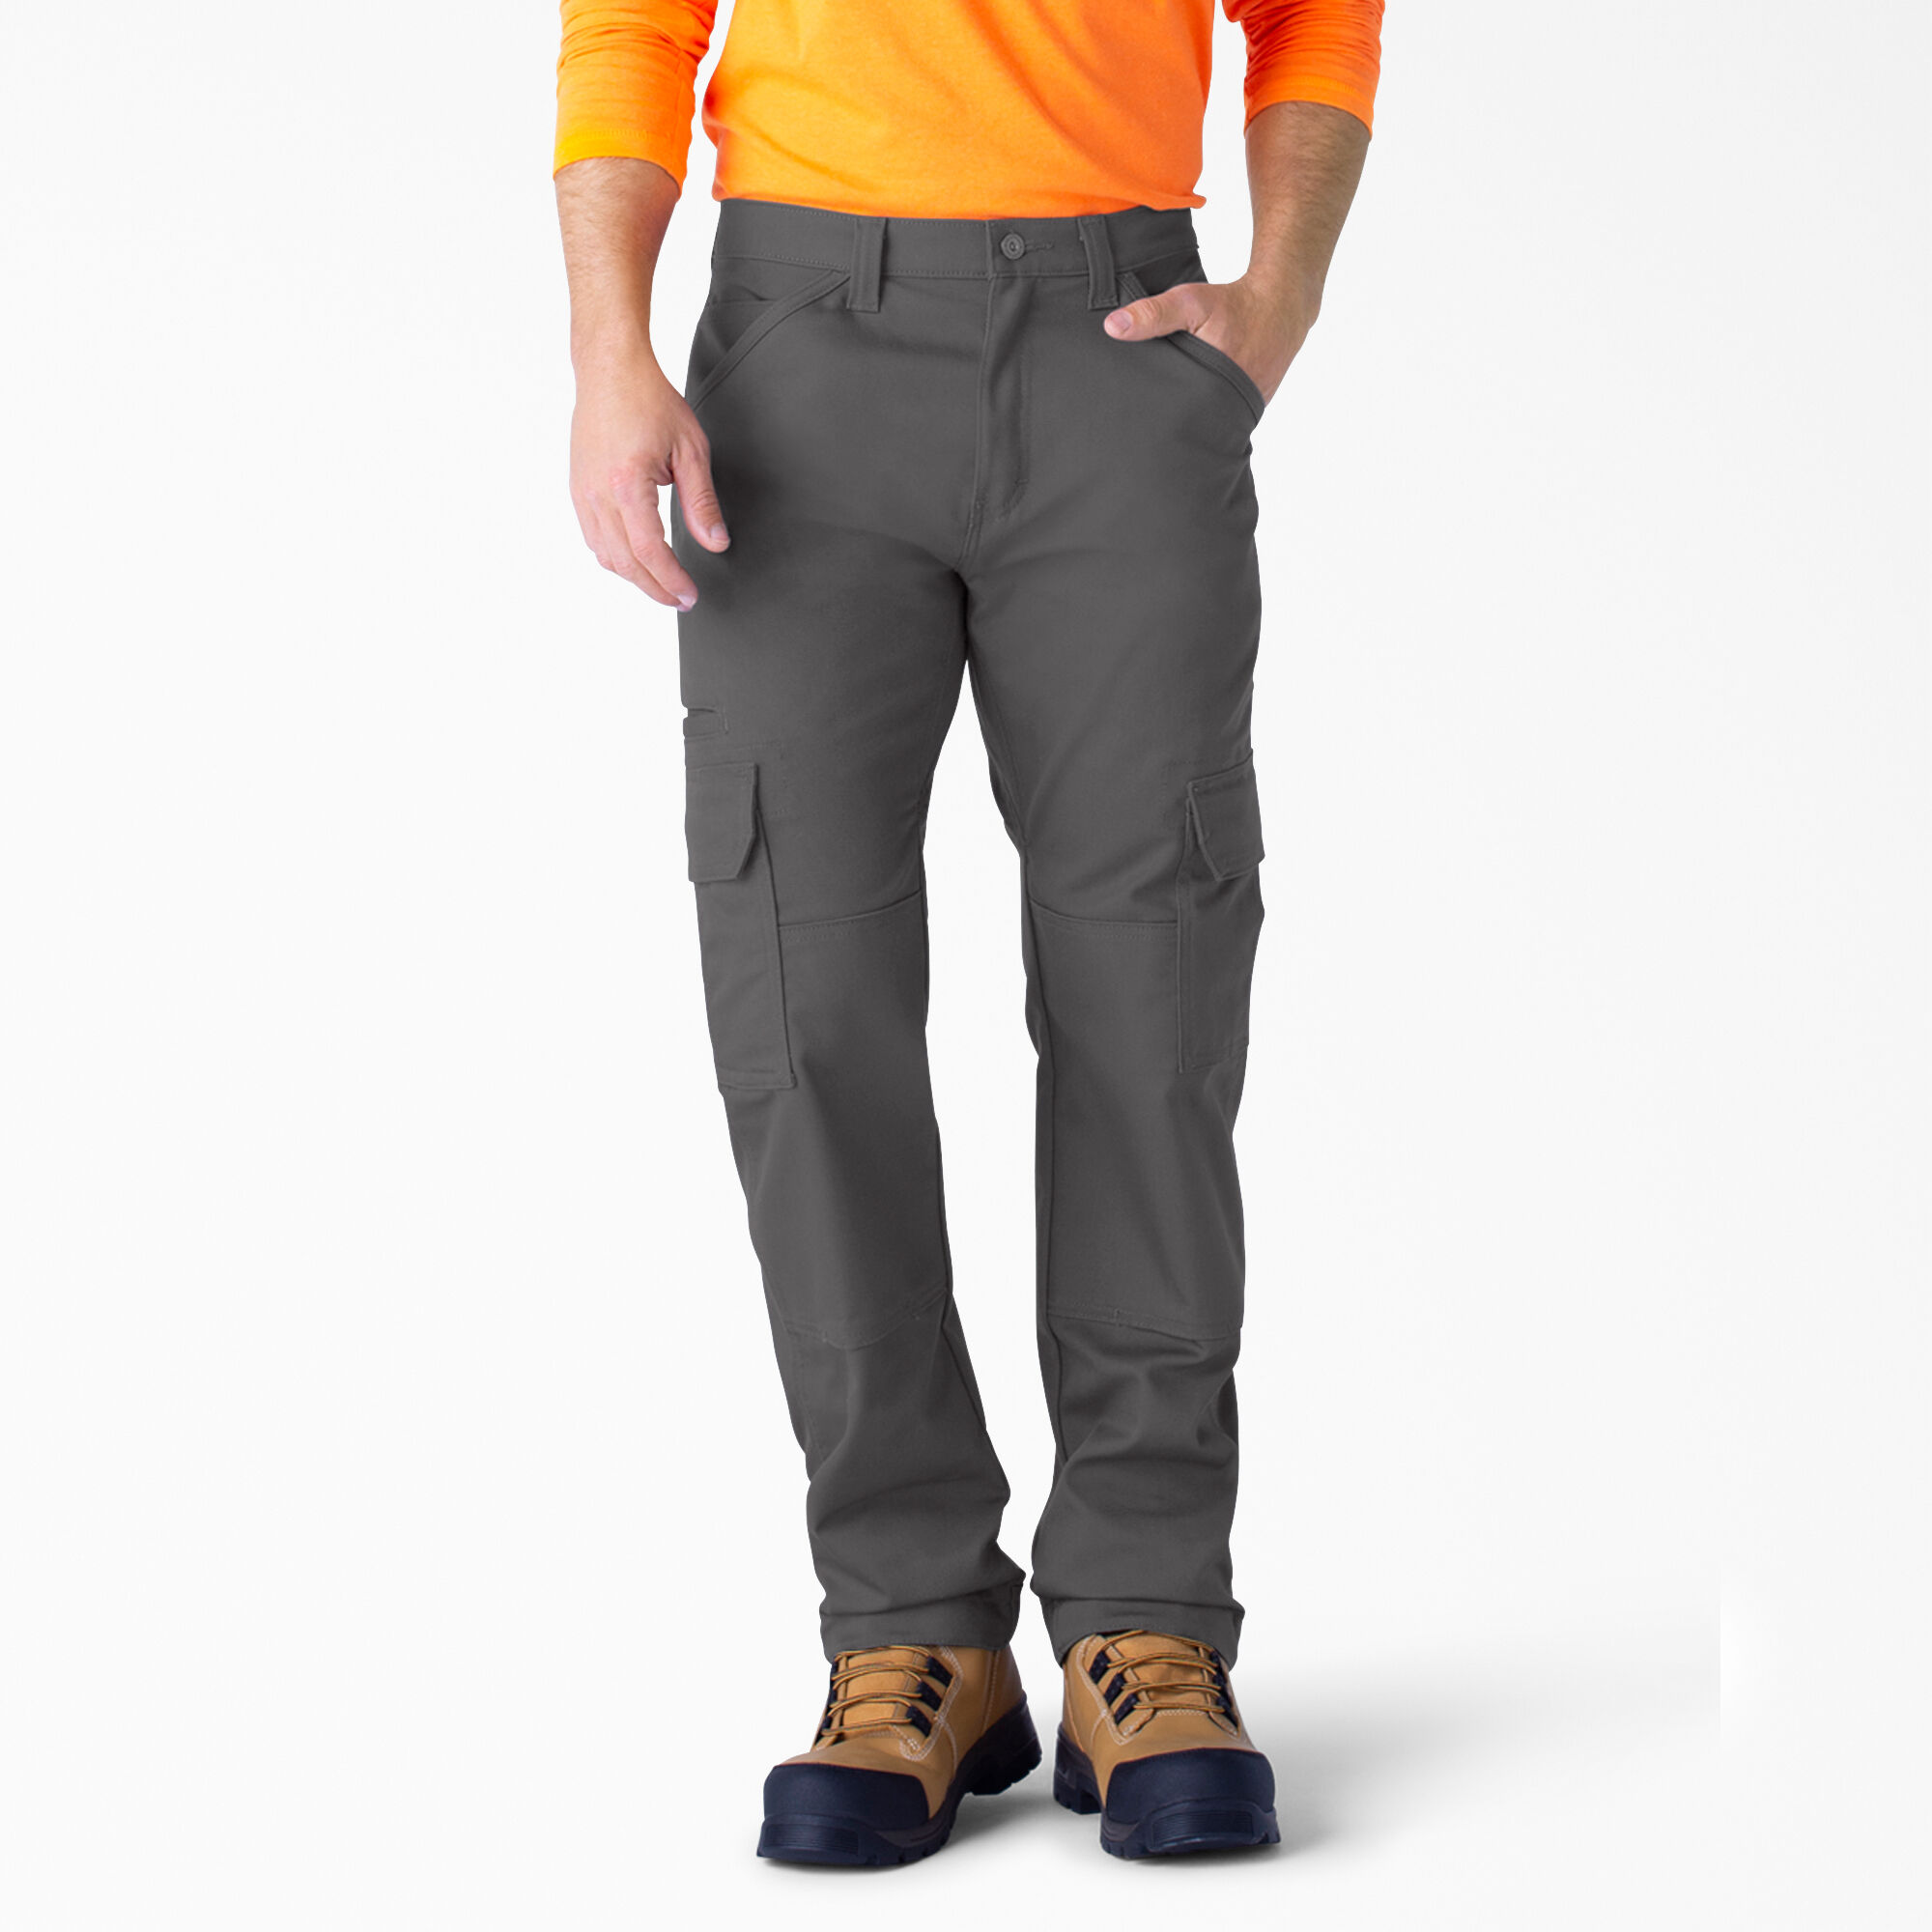 Men's FLEX DuraTech Relaxed Fit Duck Cargo Pants - Dickies US